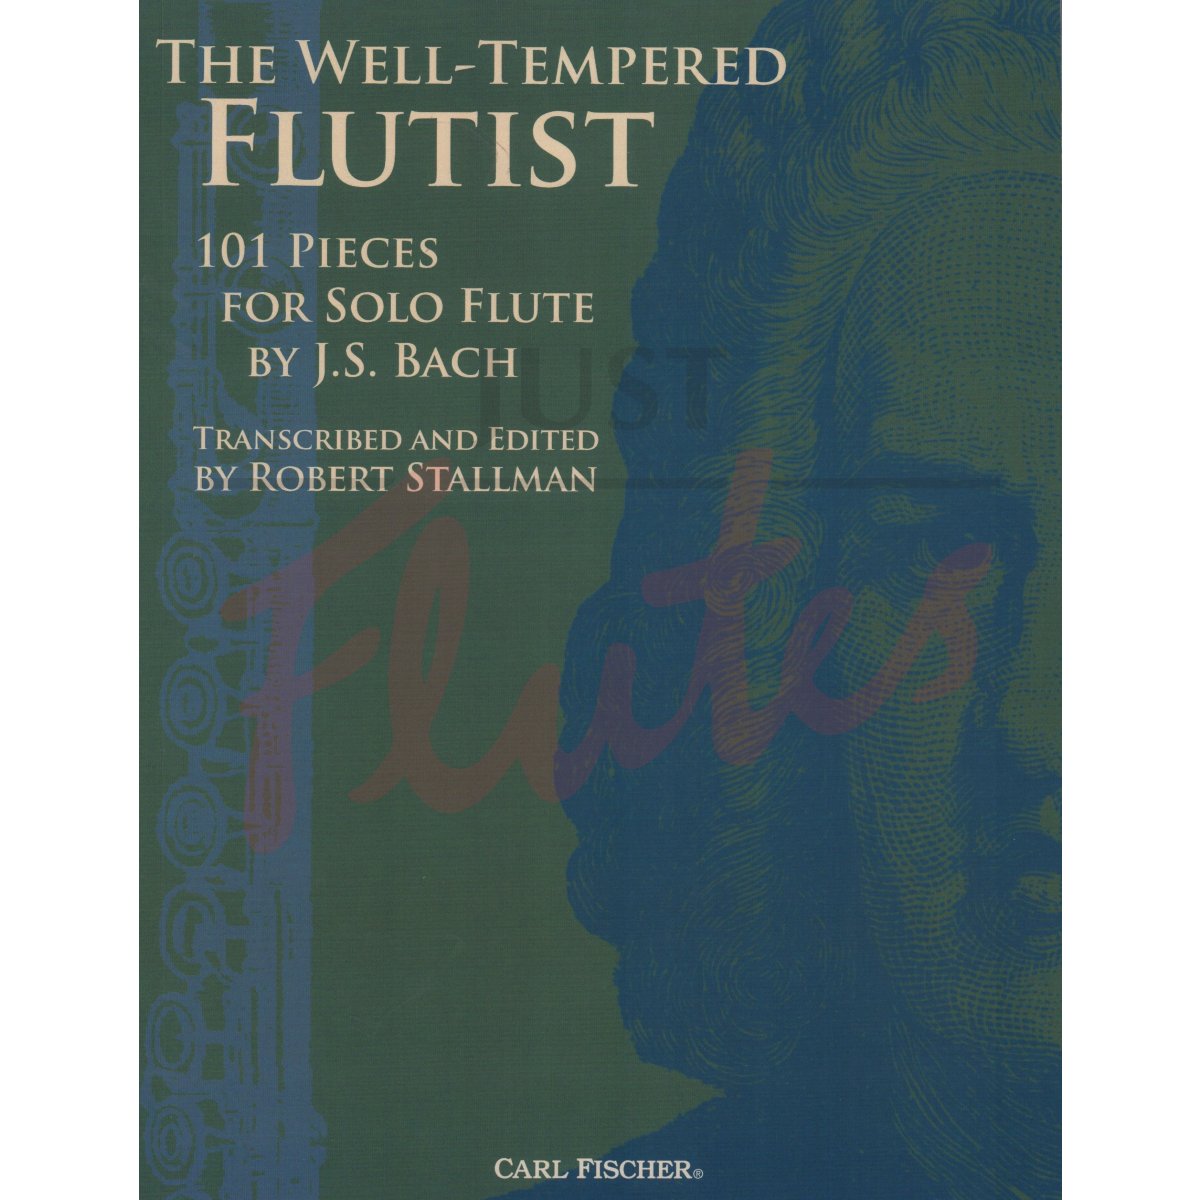 The Well-Tempered Flutist